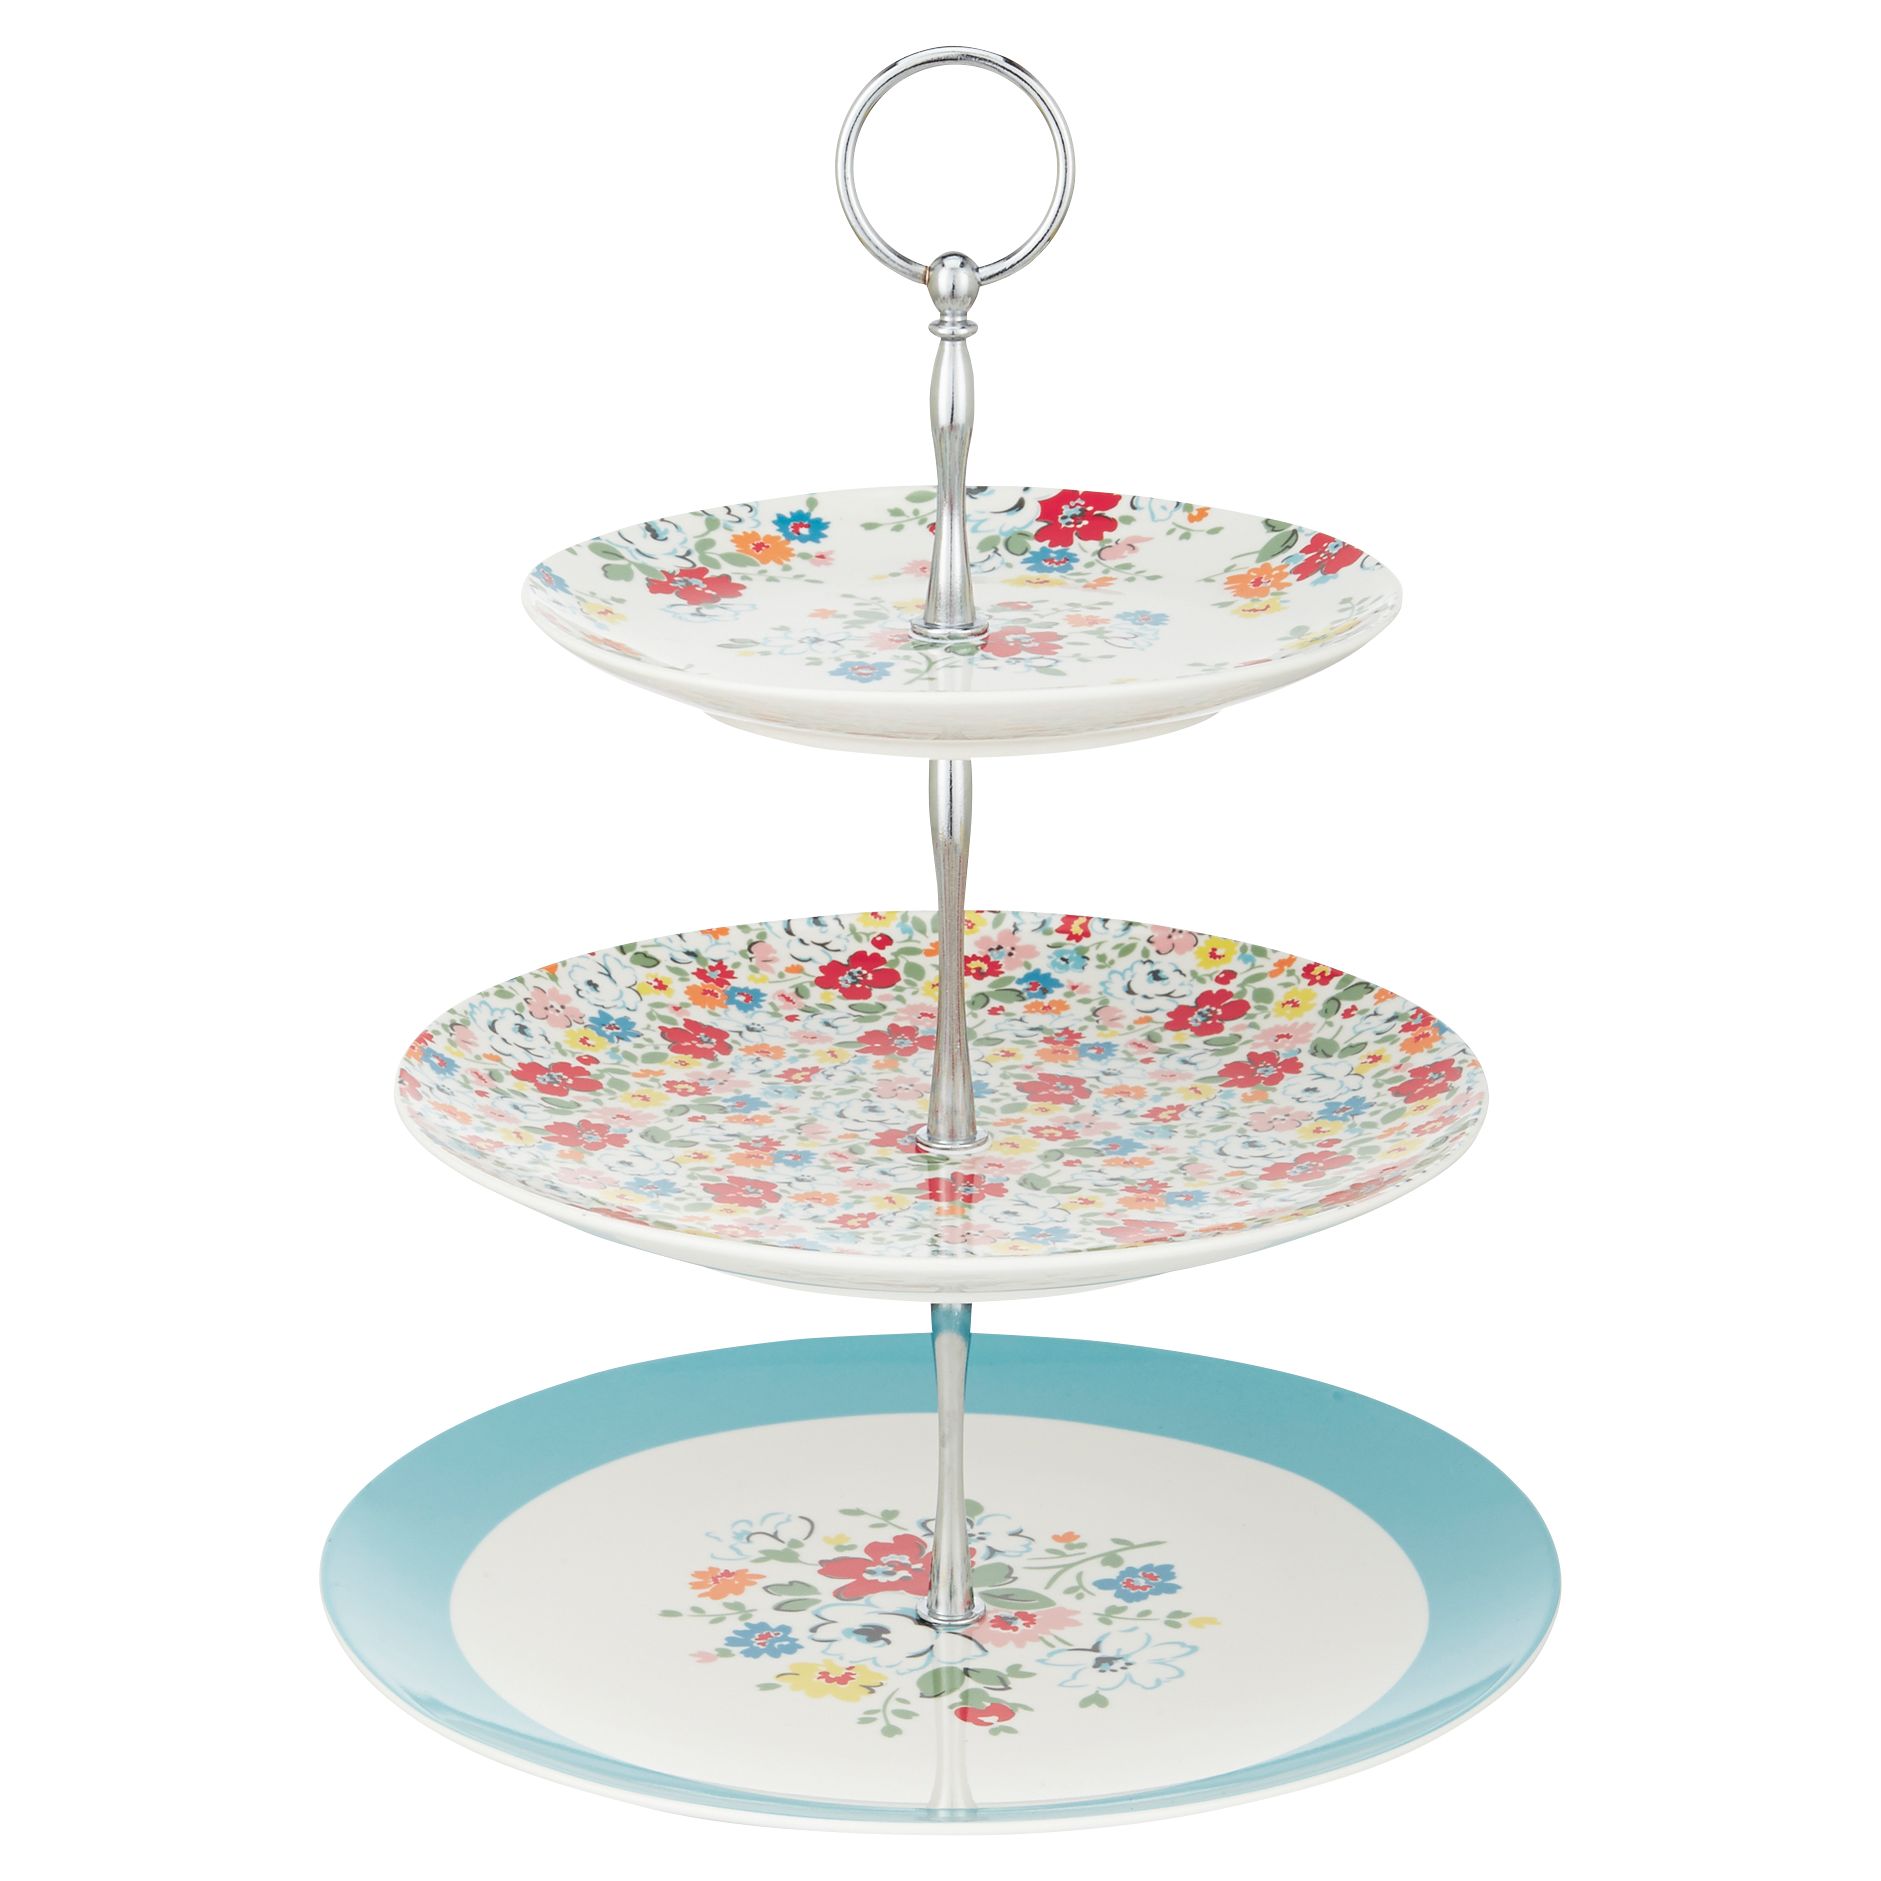 Cath Kidston Clifton Rose 3 Tier Cake Stand at John Lewis & Partners